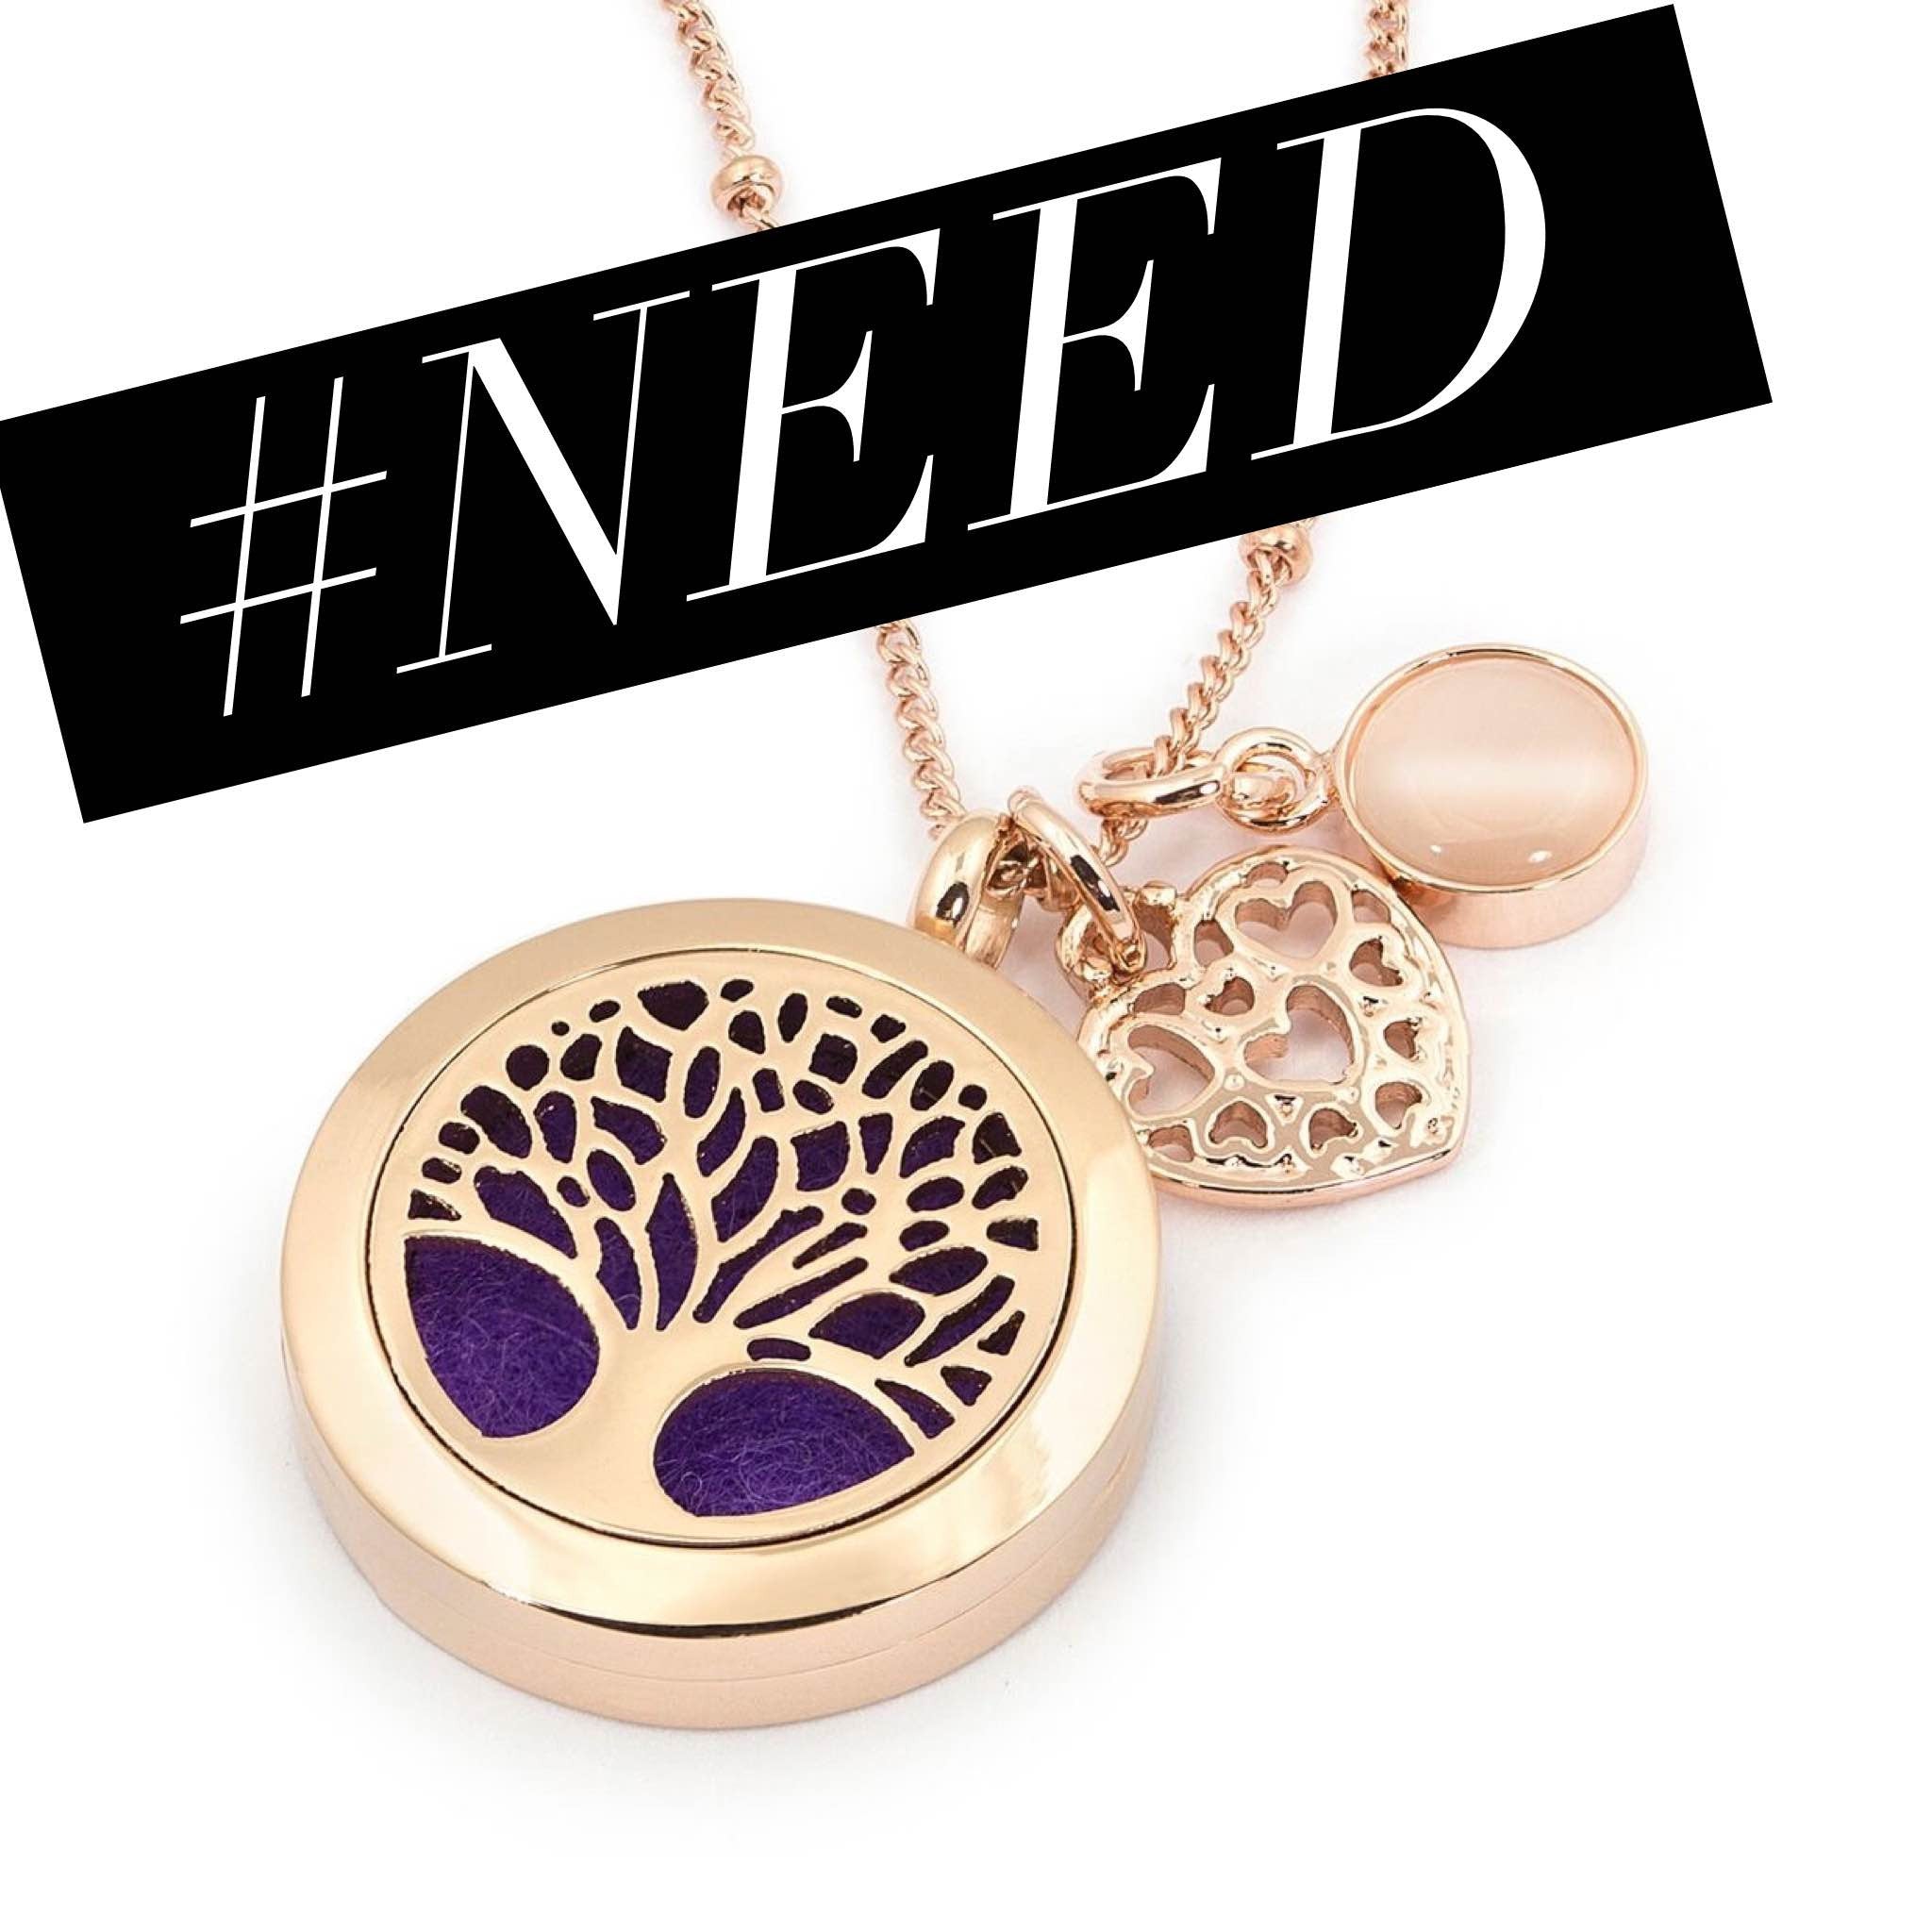 Top 10 Benefits of using an Exclusive AromaLove London Diffuser Necklace!